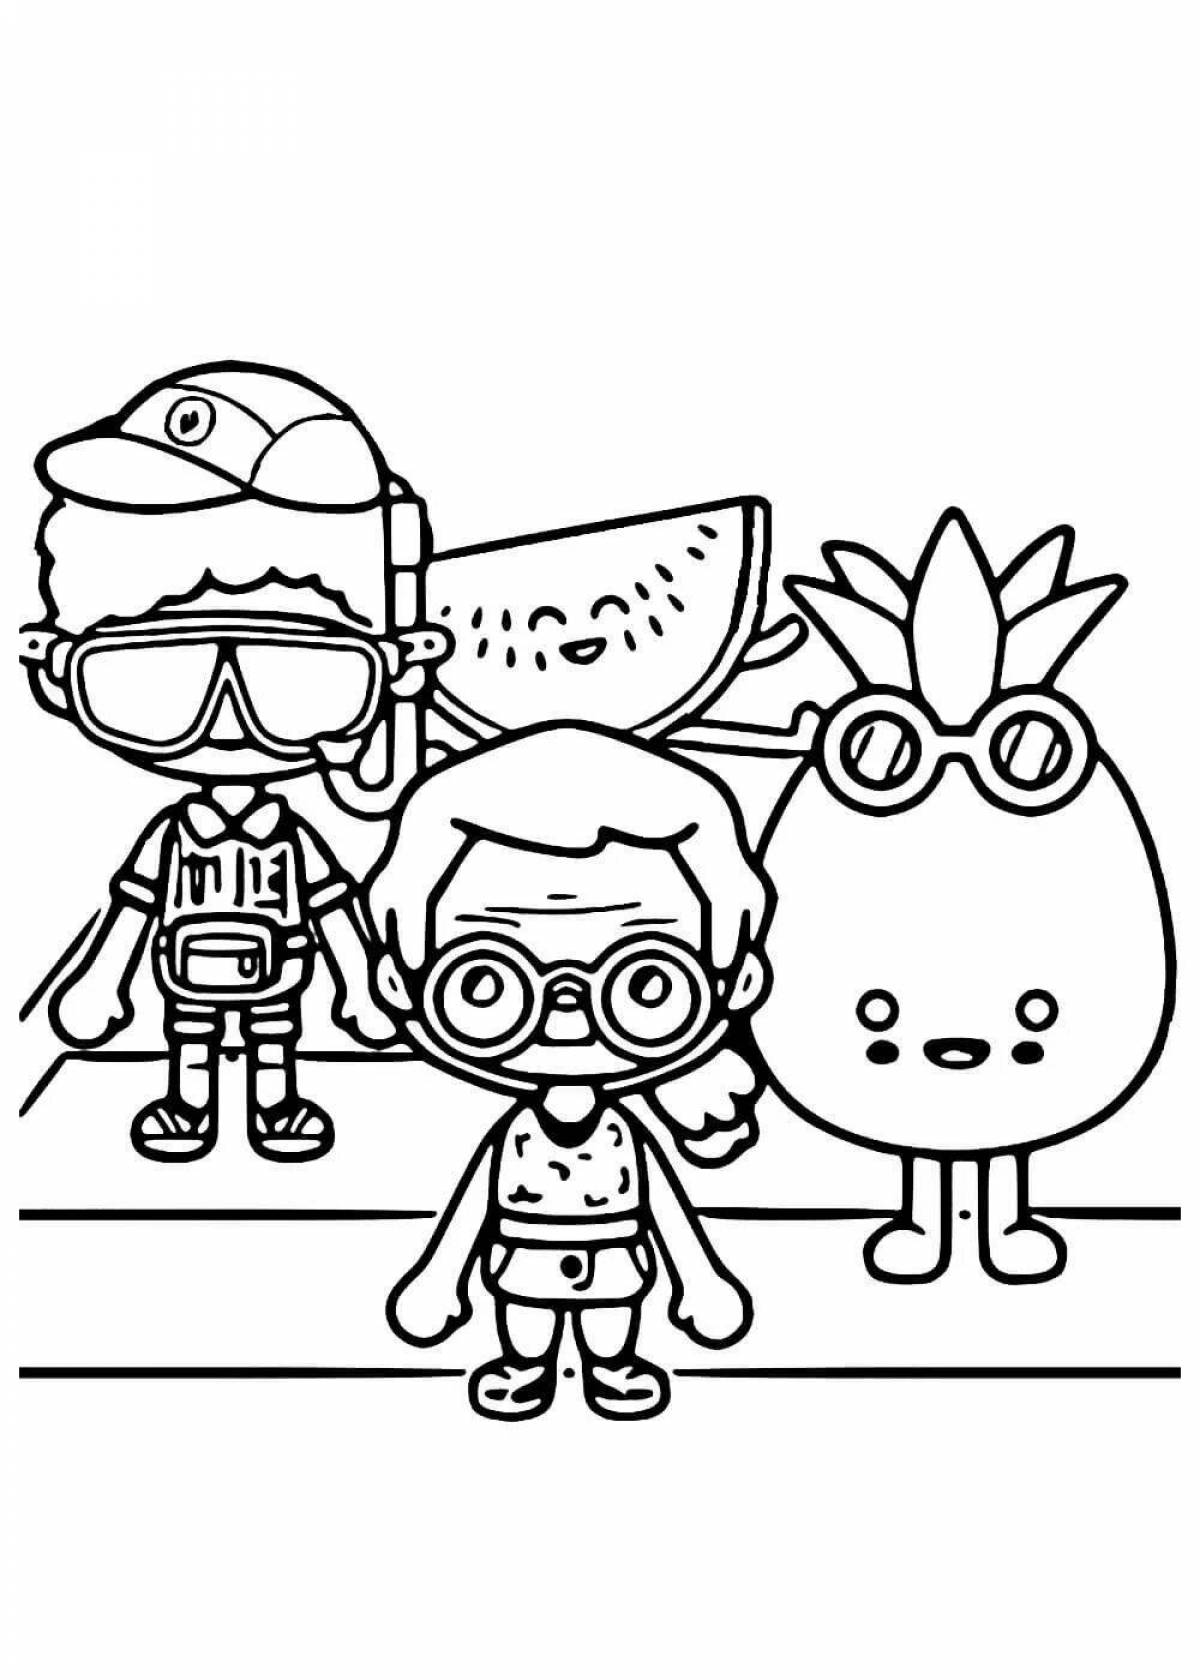 Perfect white current side coloring page